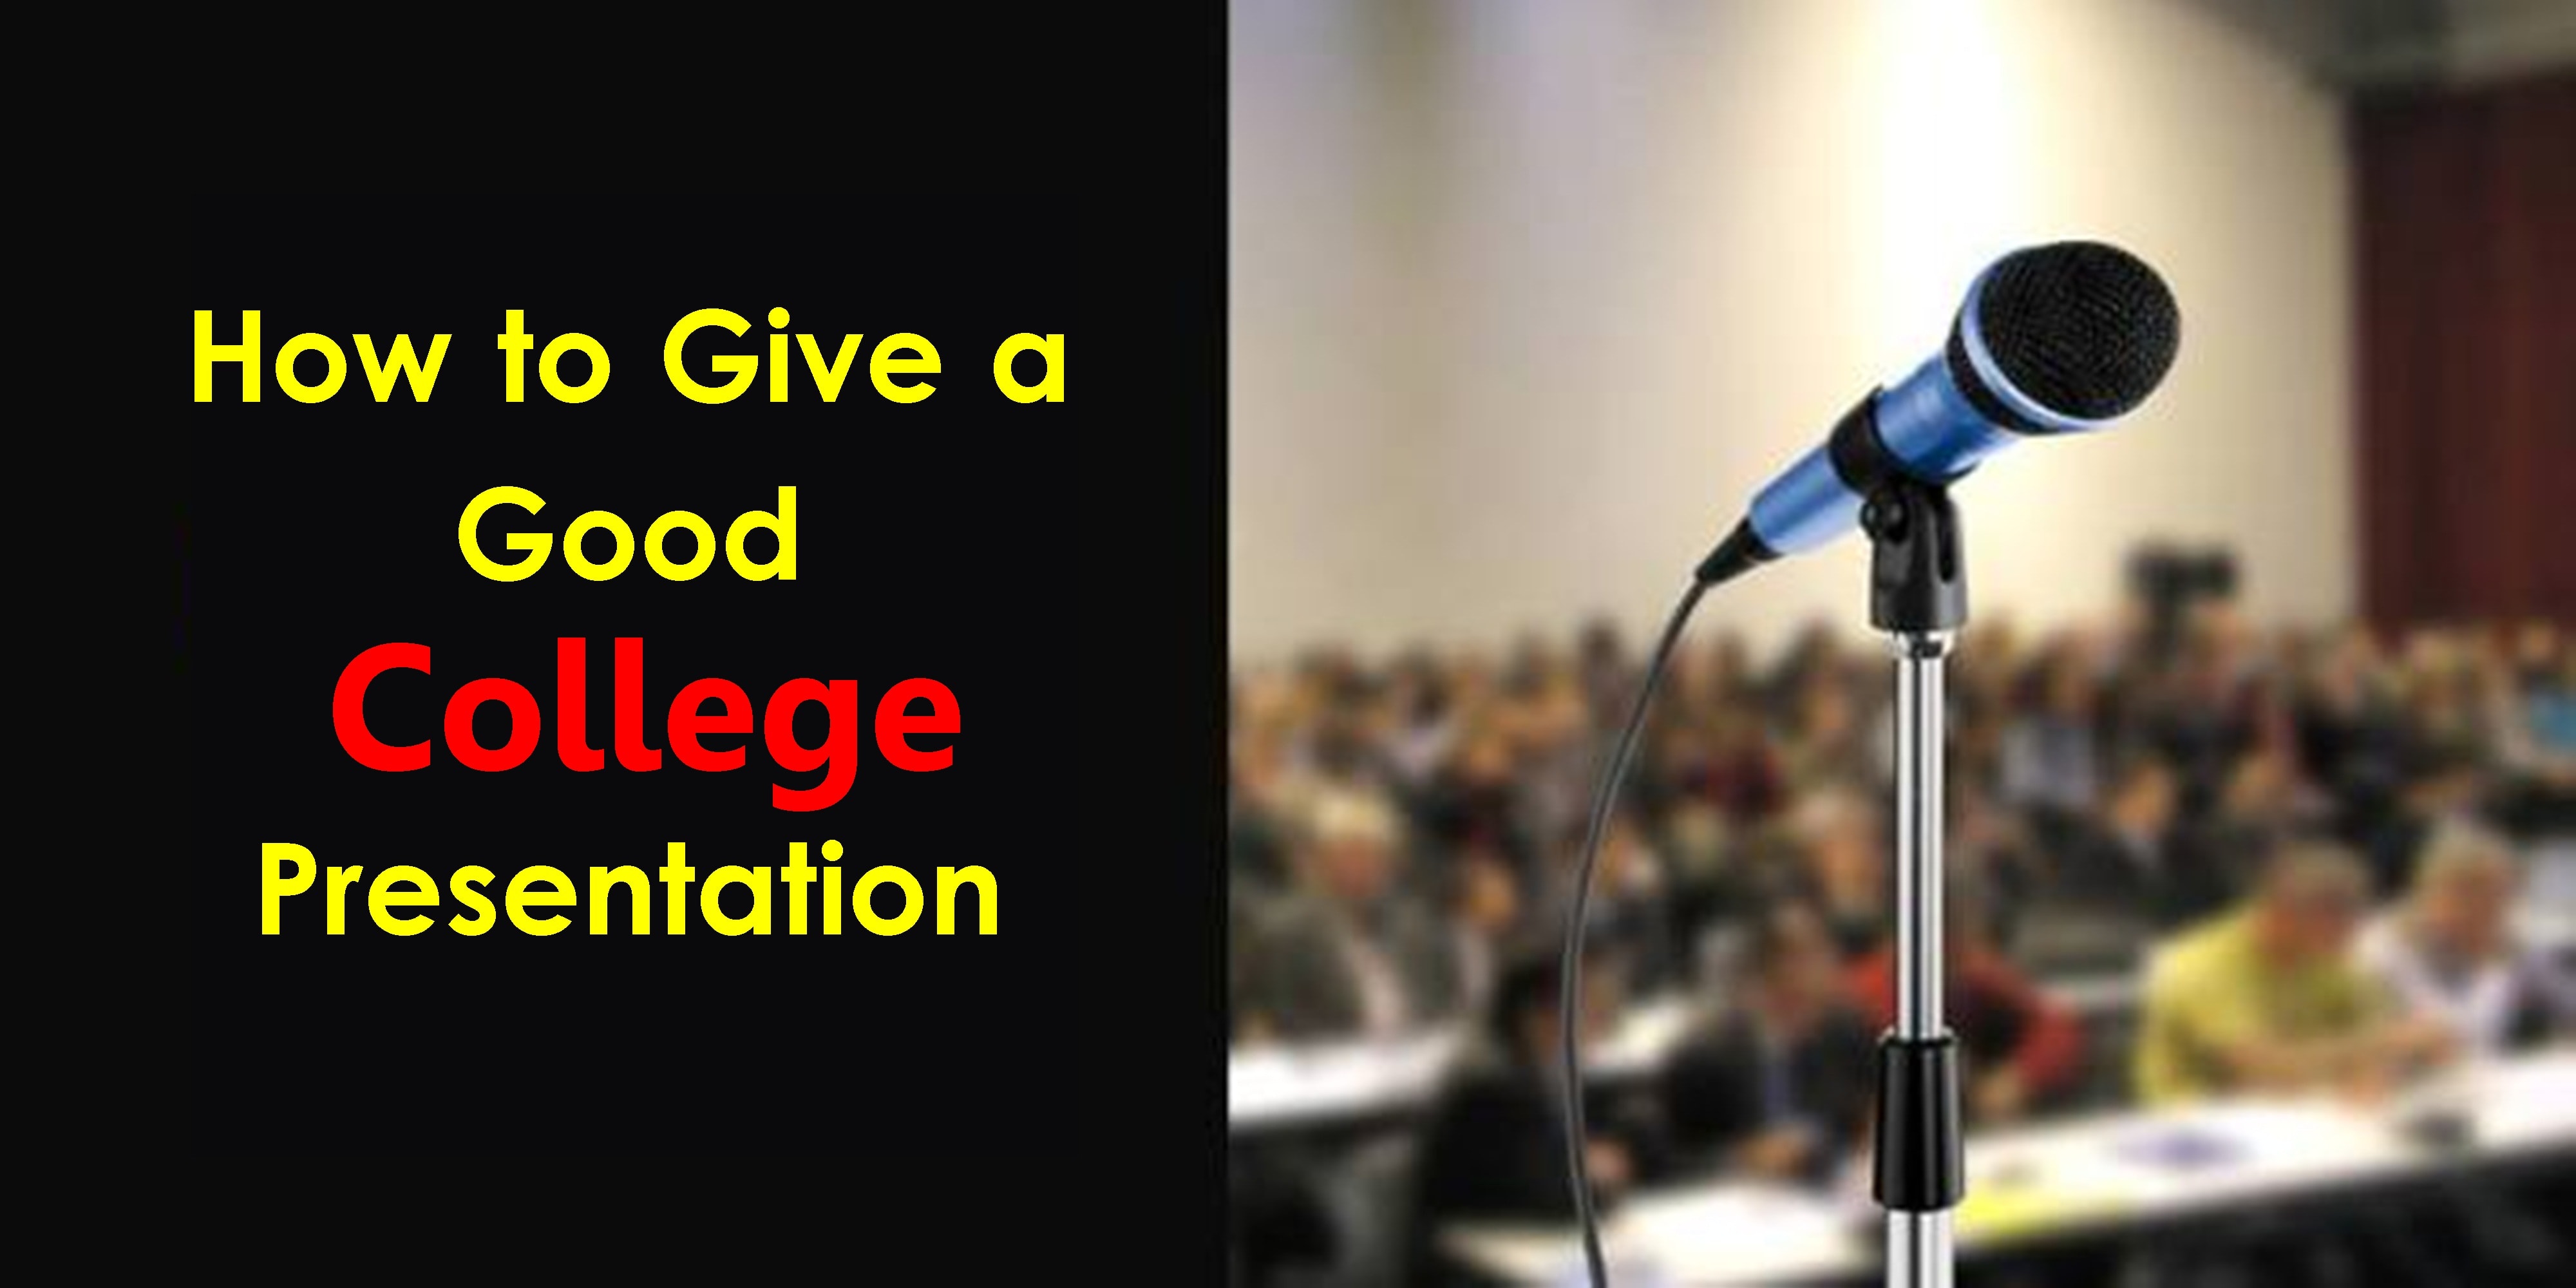 how to give a good presentation in college for students